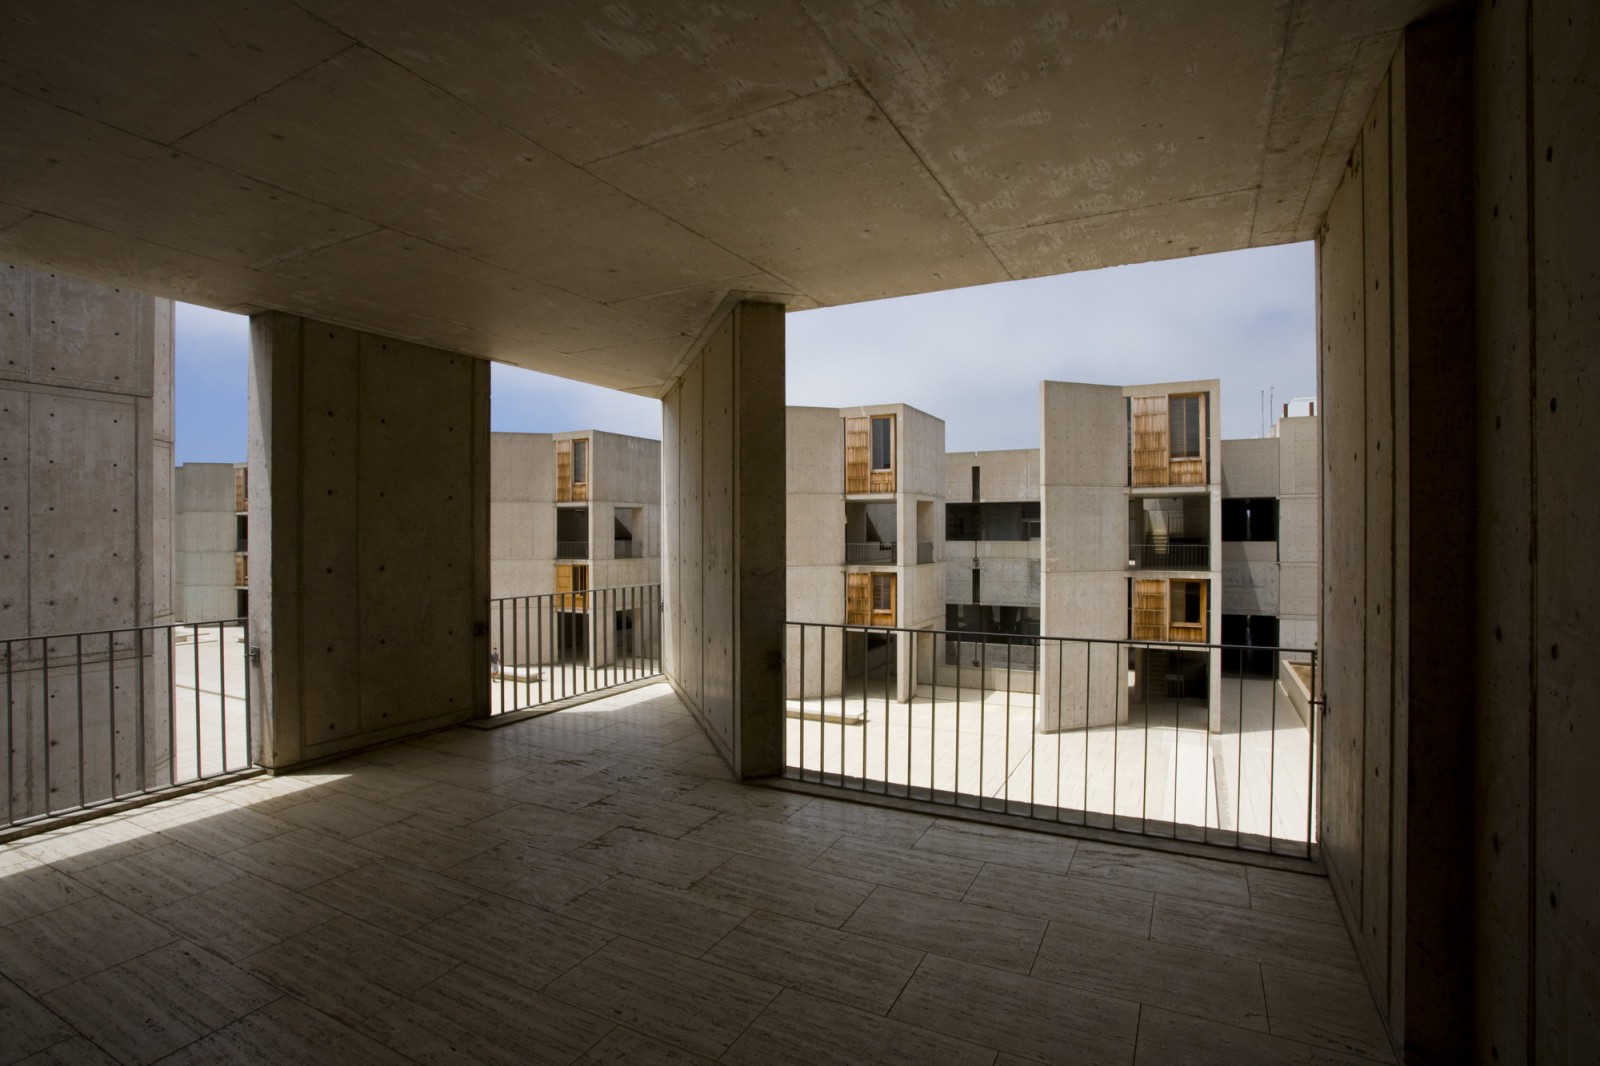 The Getty completes major renovation project of Kahn's Salk Institute, News